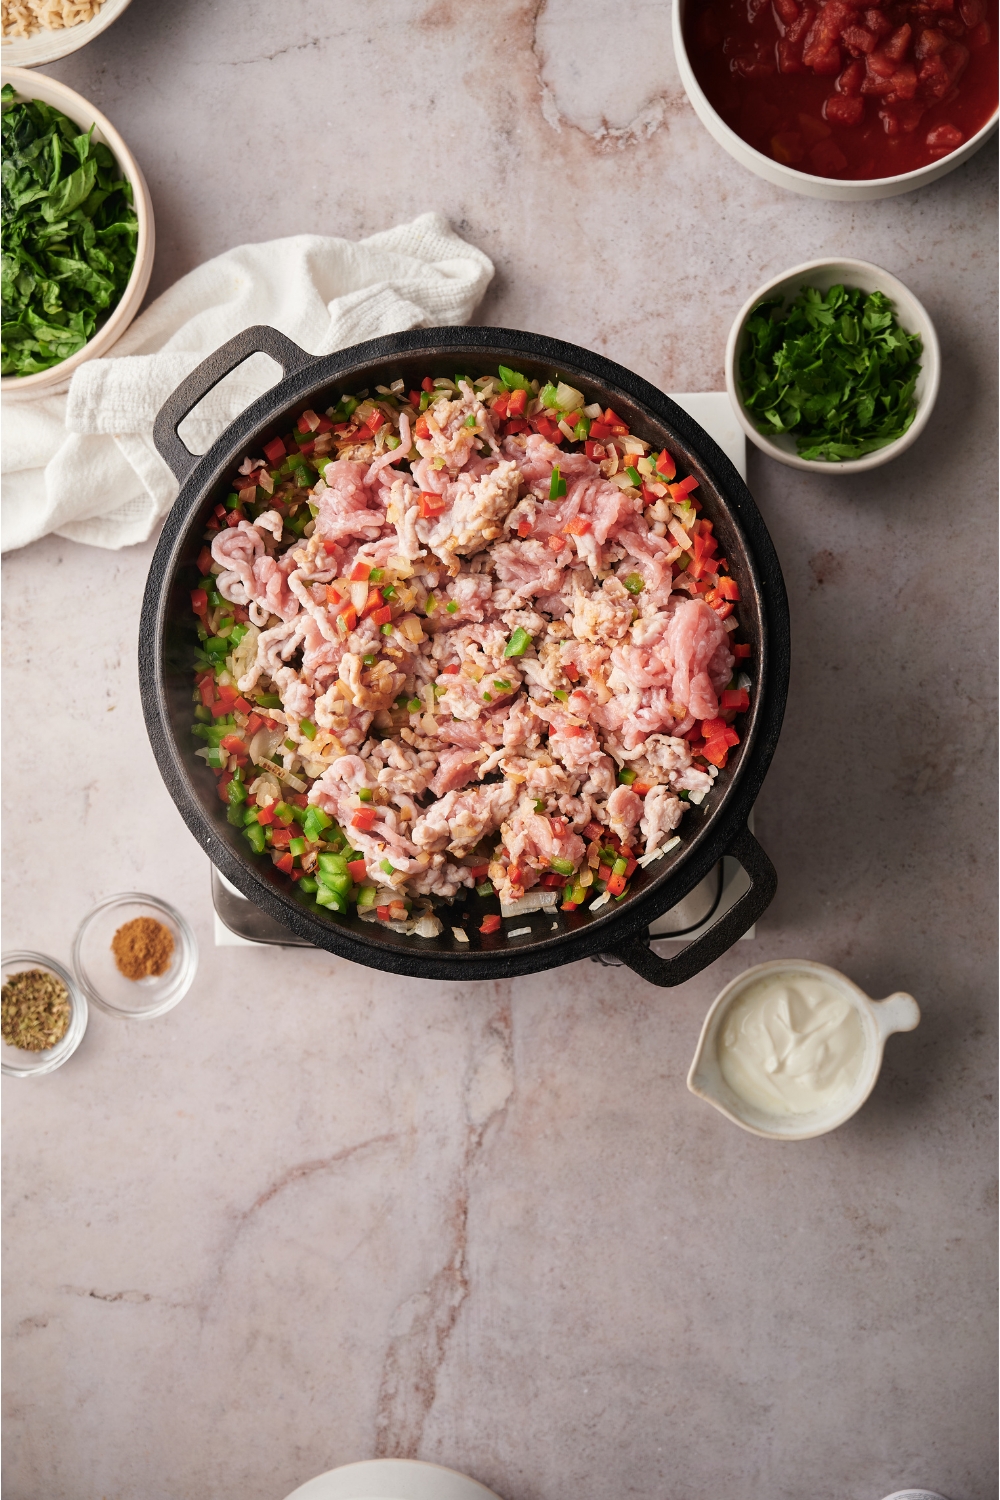 Black skillet filled with raw ground turkey, diced peppers and diced onions. The skillet is surrounded by an assortment of ingredients.